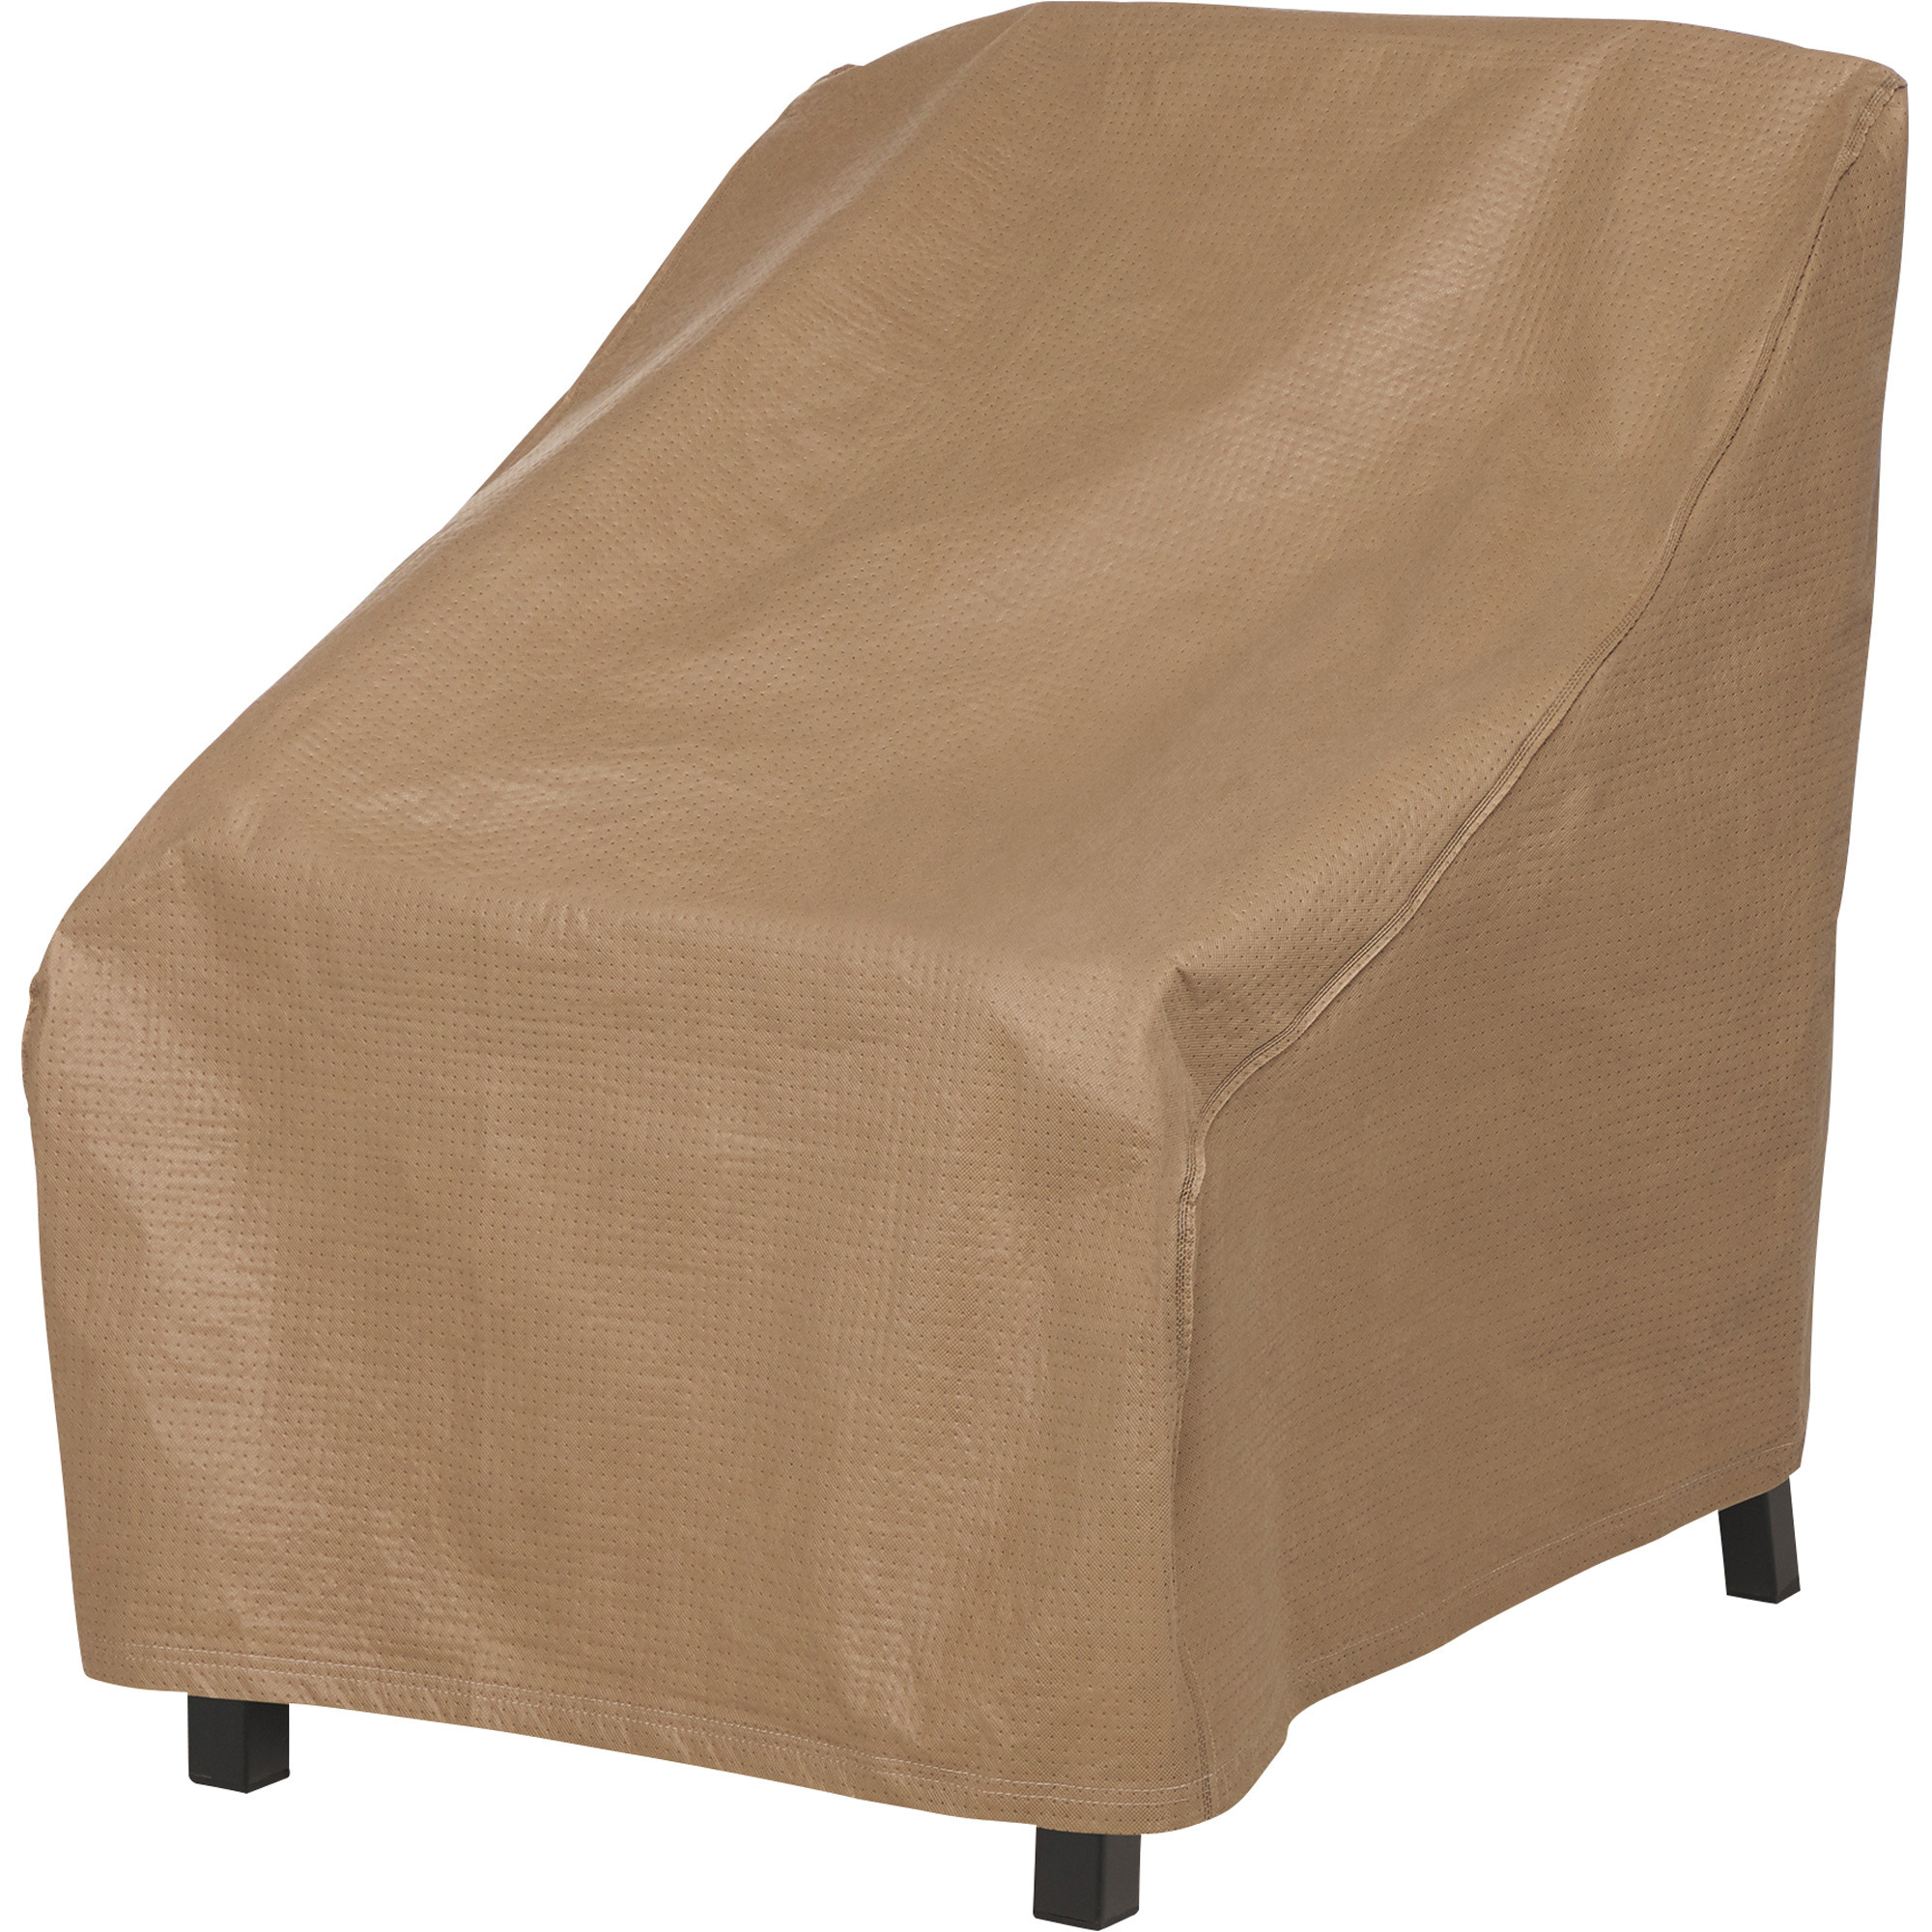 Classic Accessories Duck Covers Essential 36Inch Lounge Chair Cover, Latte, Model ECH363736